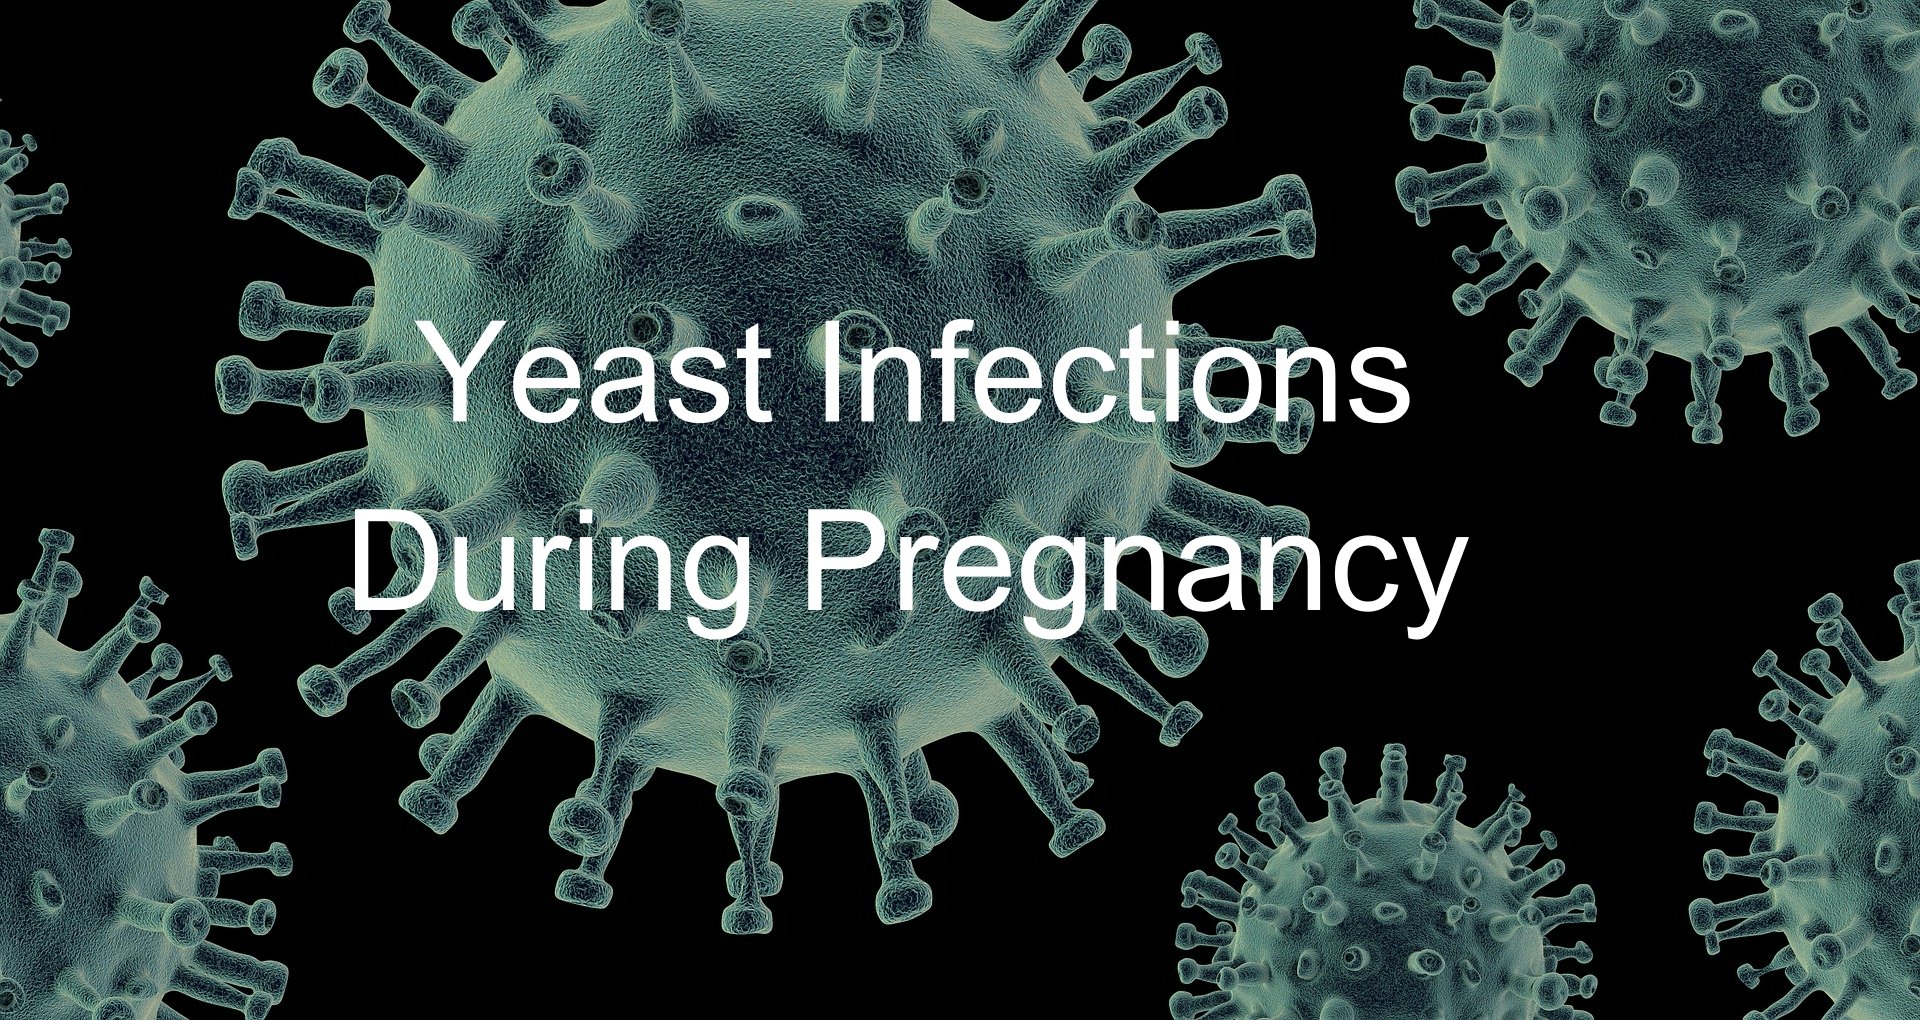 Yeast Infections: What's Normal, and When Should You Call Your OB